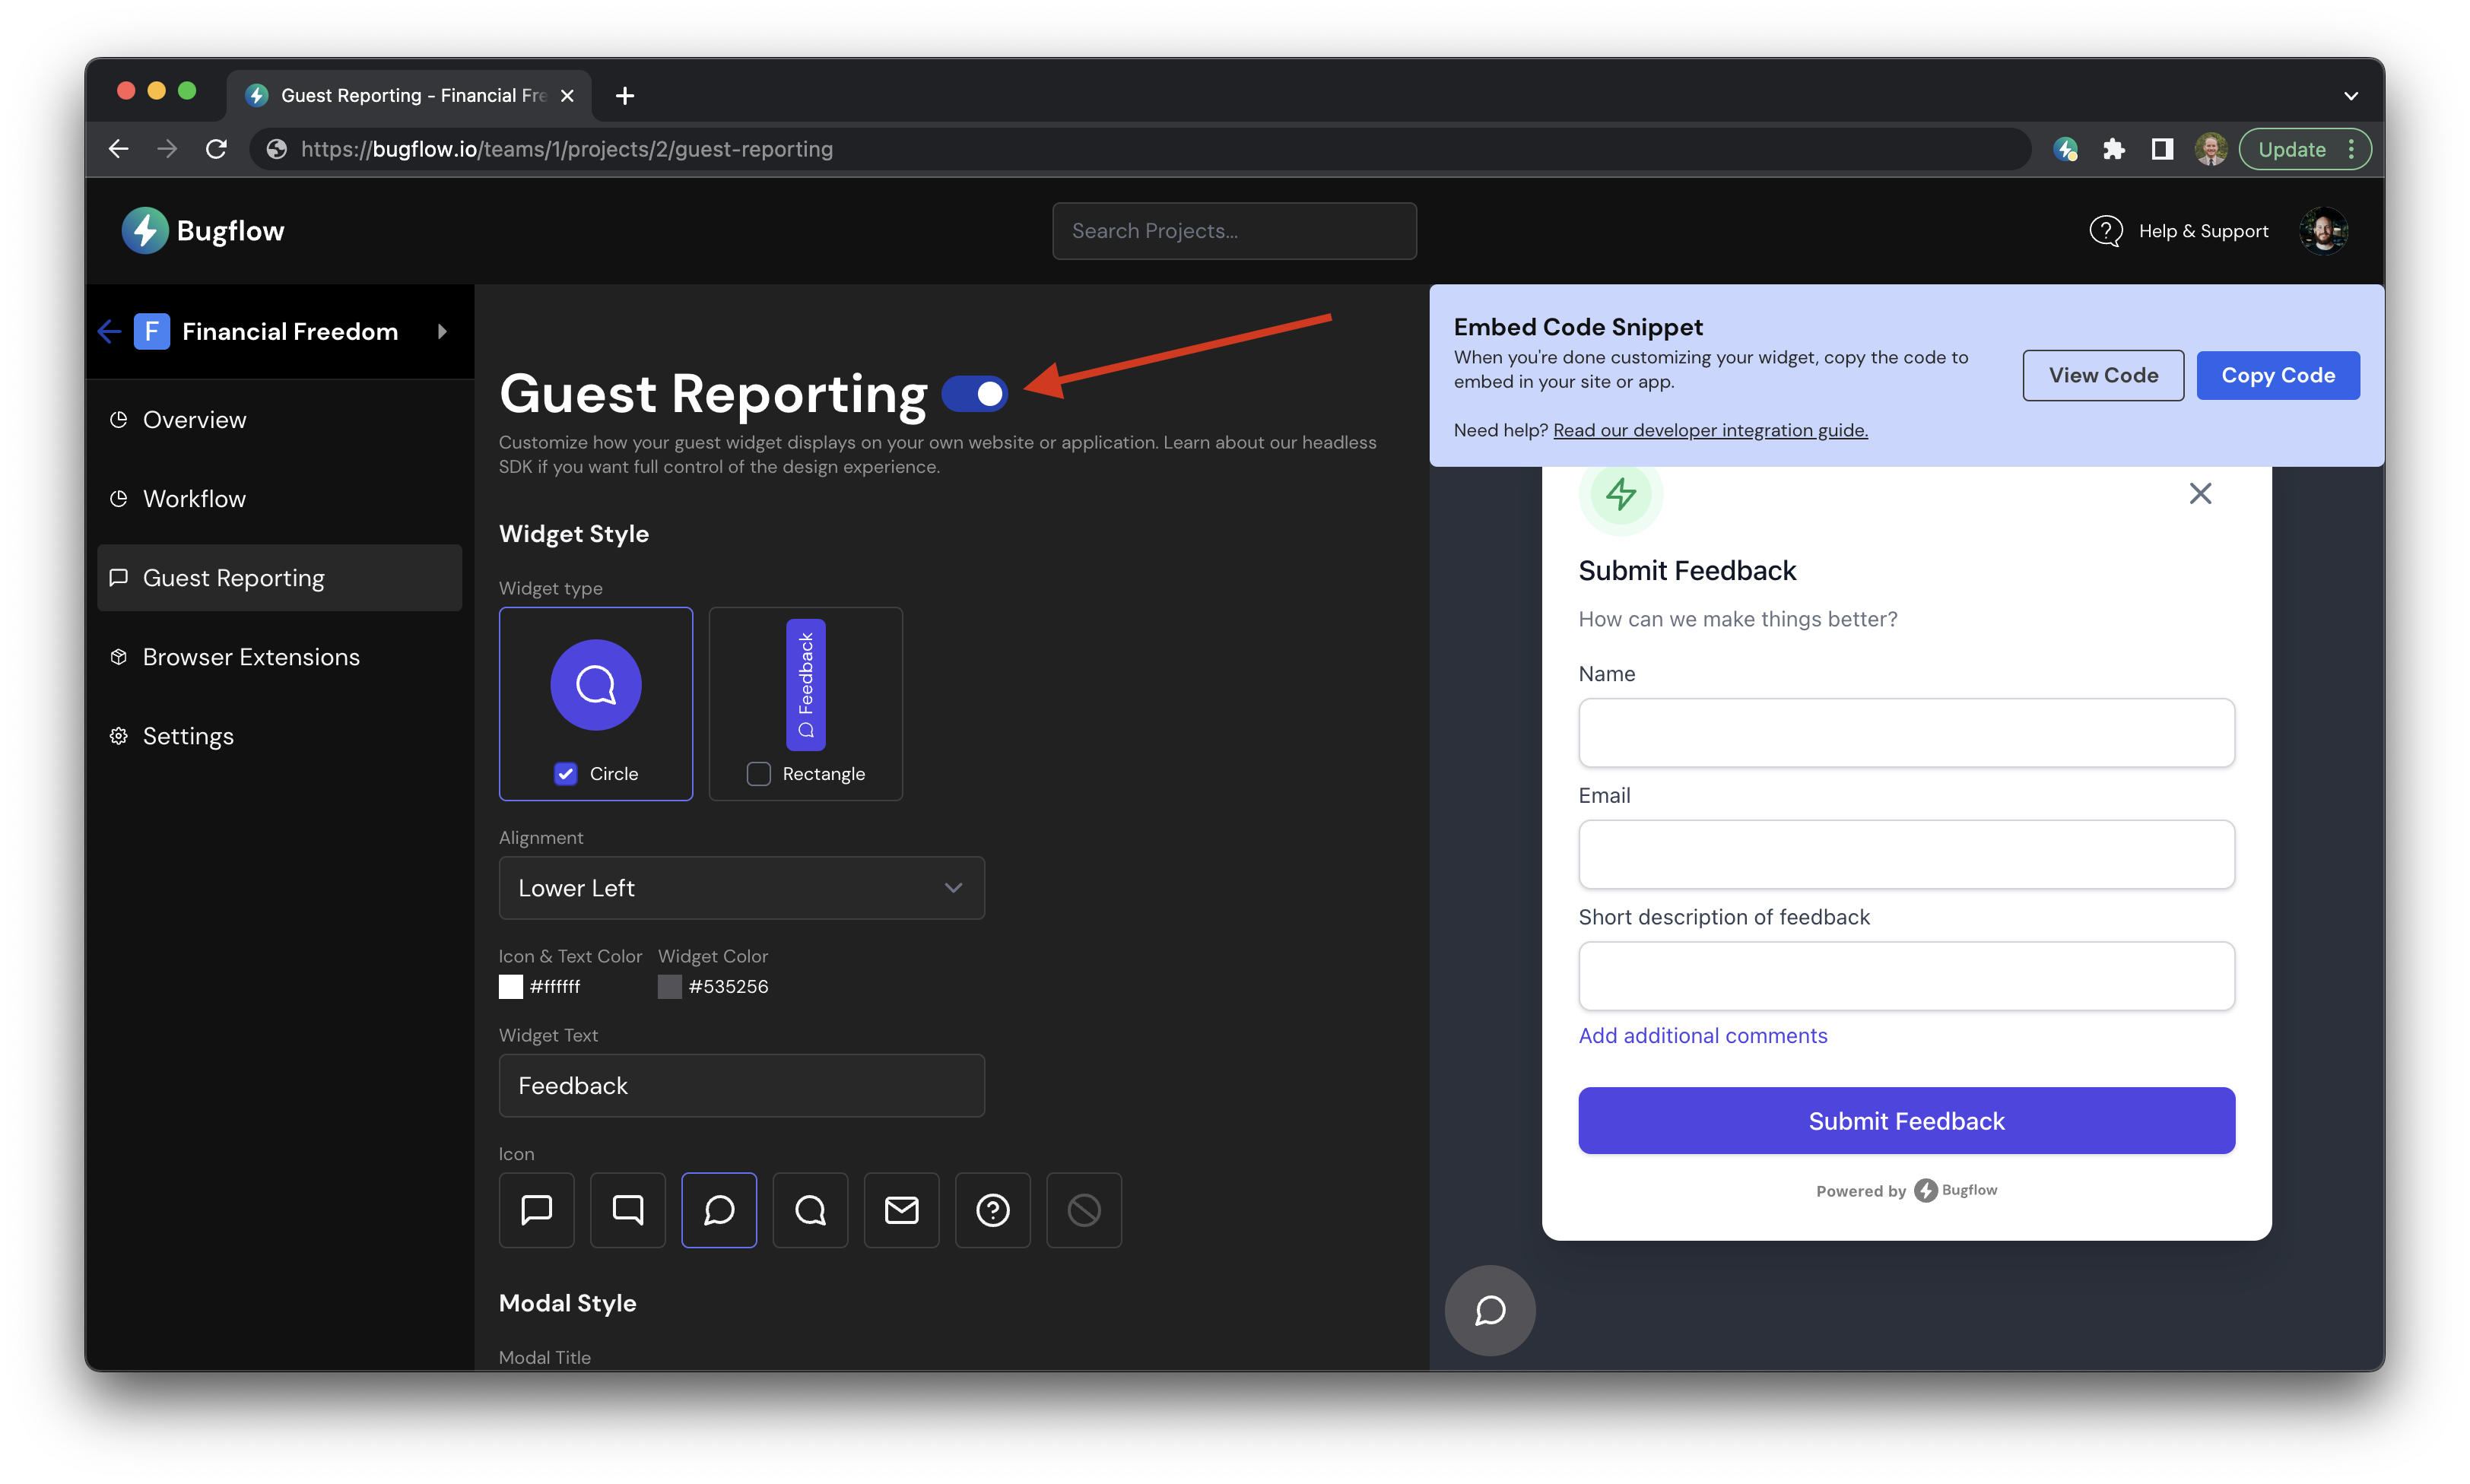 Where to enable guest reporting on Bugflow